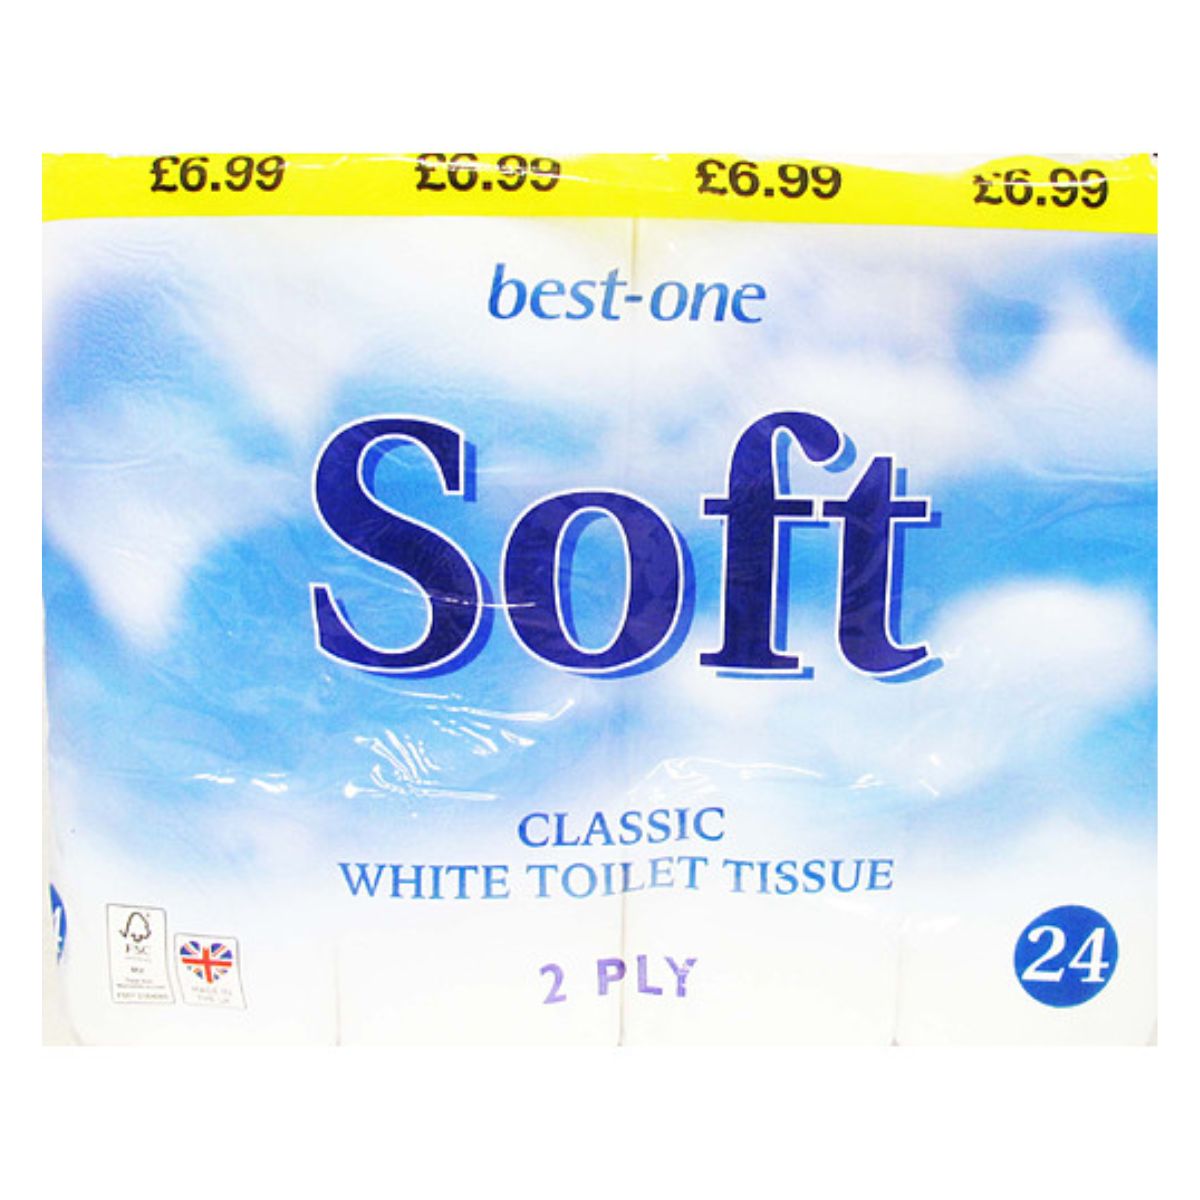 Packaging for Best One - Soft Toilet Tissue White - 24pcs, priced at £6.99.